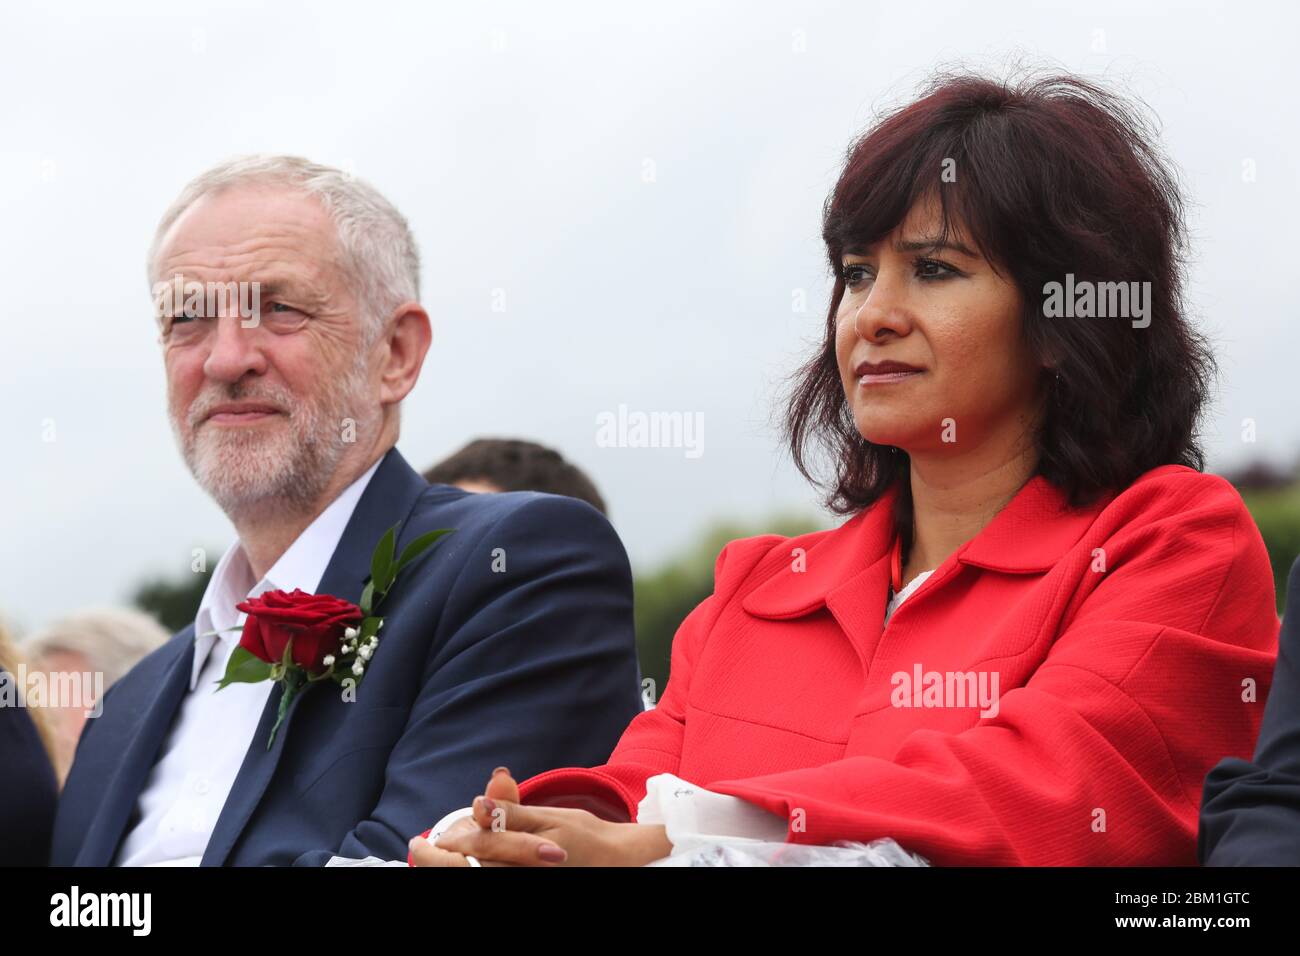 Labour leader Jeremy Corbyn, with his wife Laura Alvarez, at the Durham Miners' Gala in County Durham, UK. Stock Photo